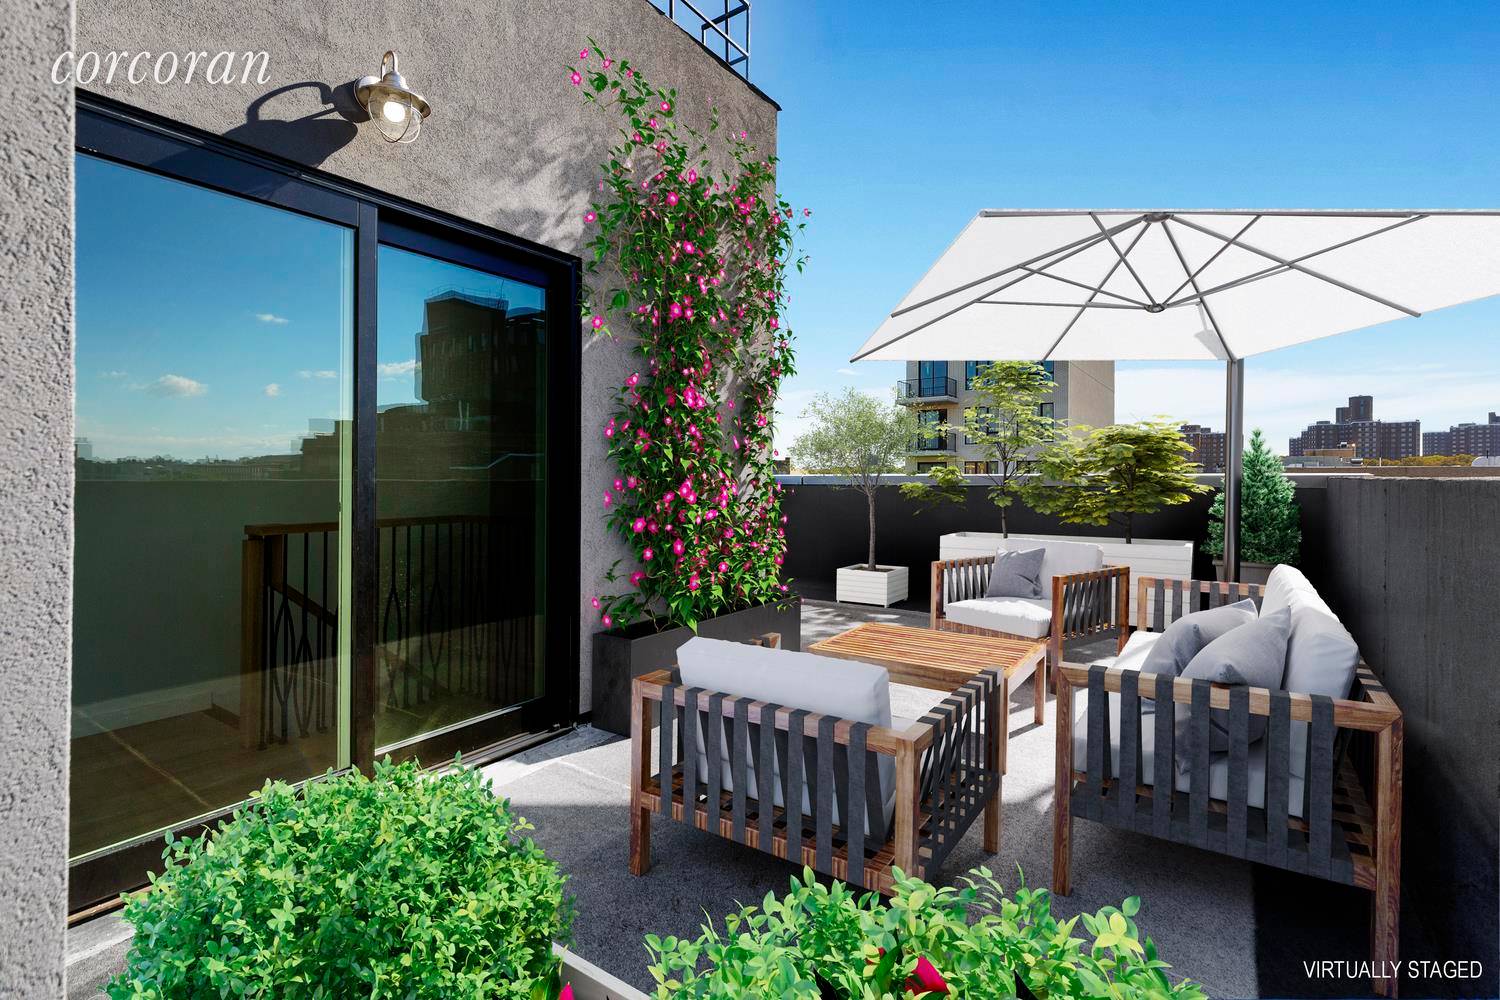 IMMEDIATE OCCUPANCY ! Introducing The Herkimer ; 511 Herkimer is a brand new condominium development delivering eight thoughtfully crafted studios, one bedrooms amp ; one bedroom lofted home offices that ...